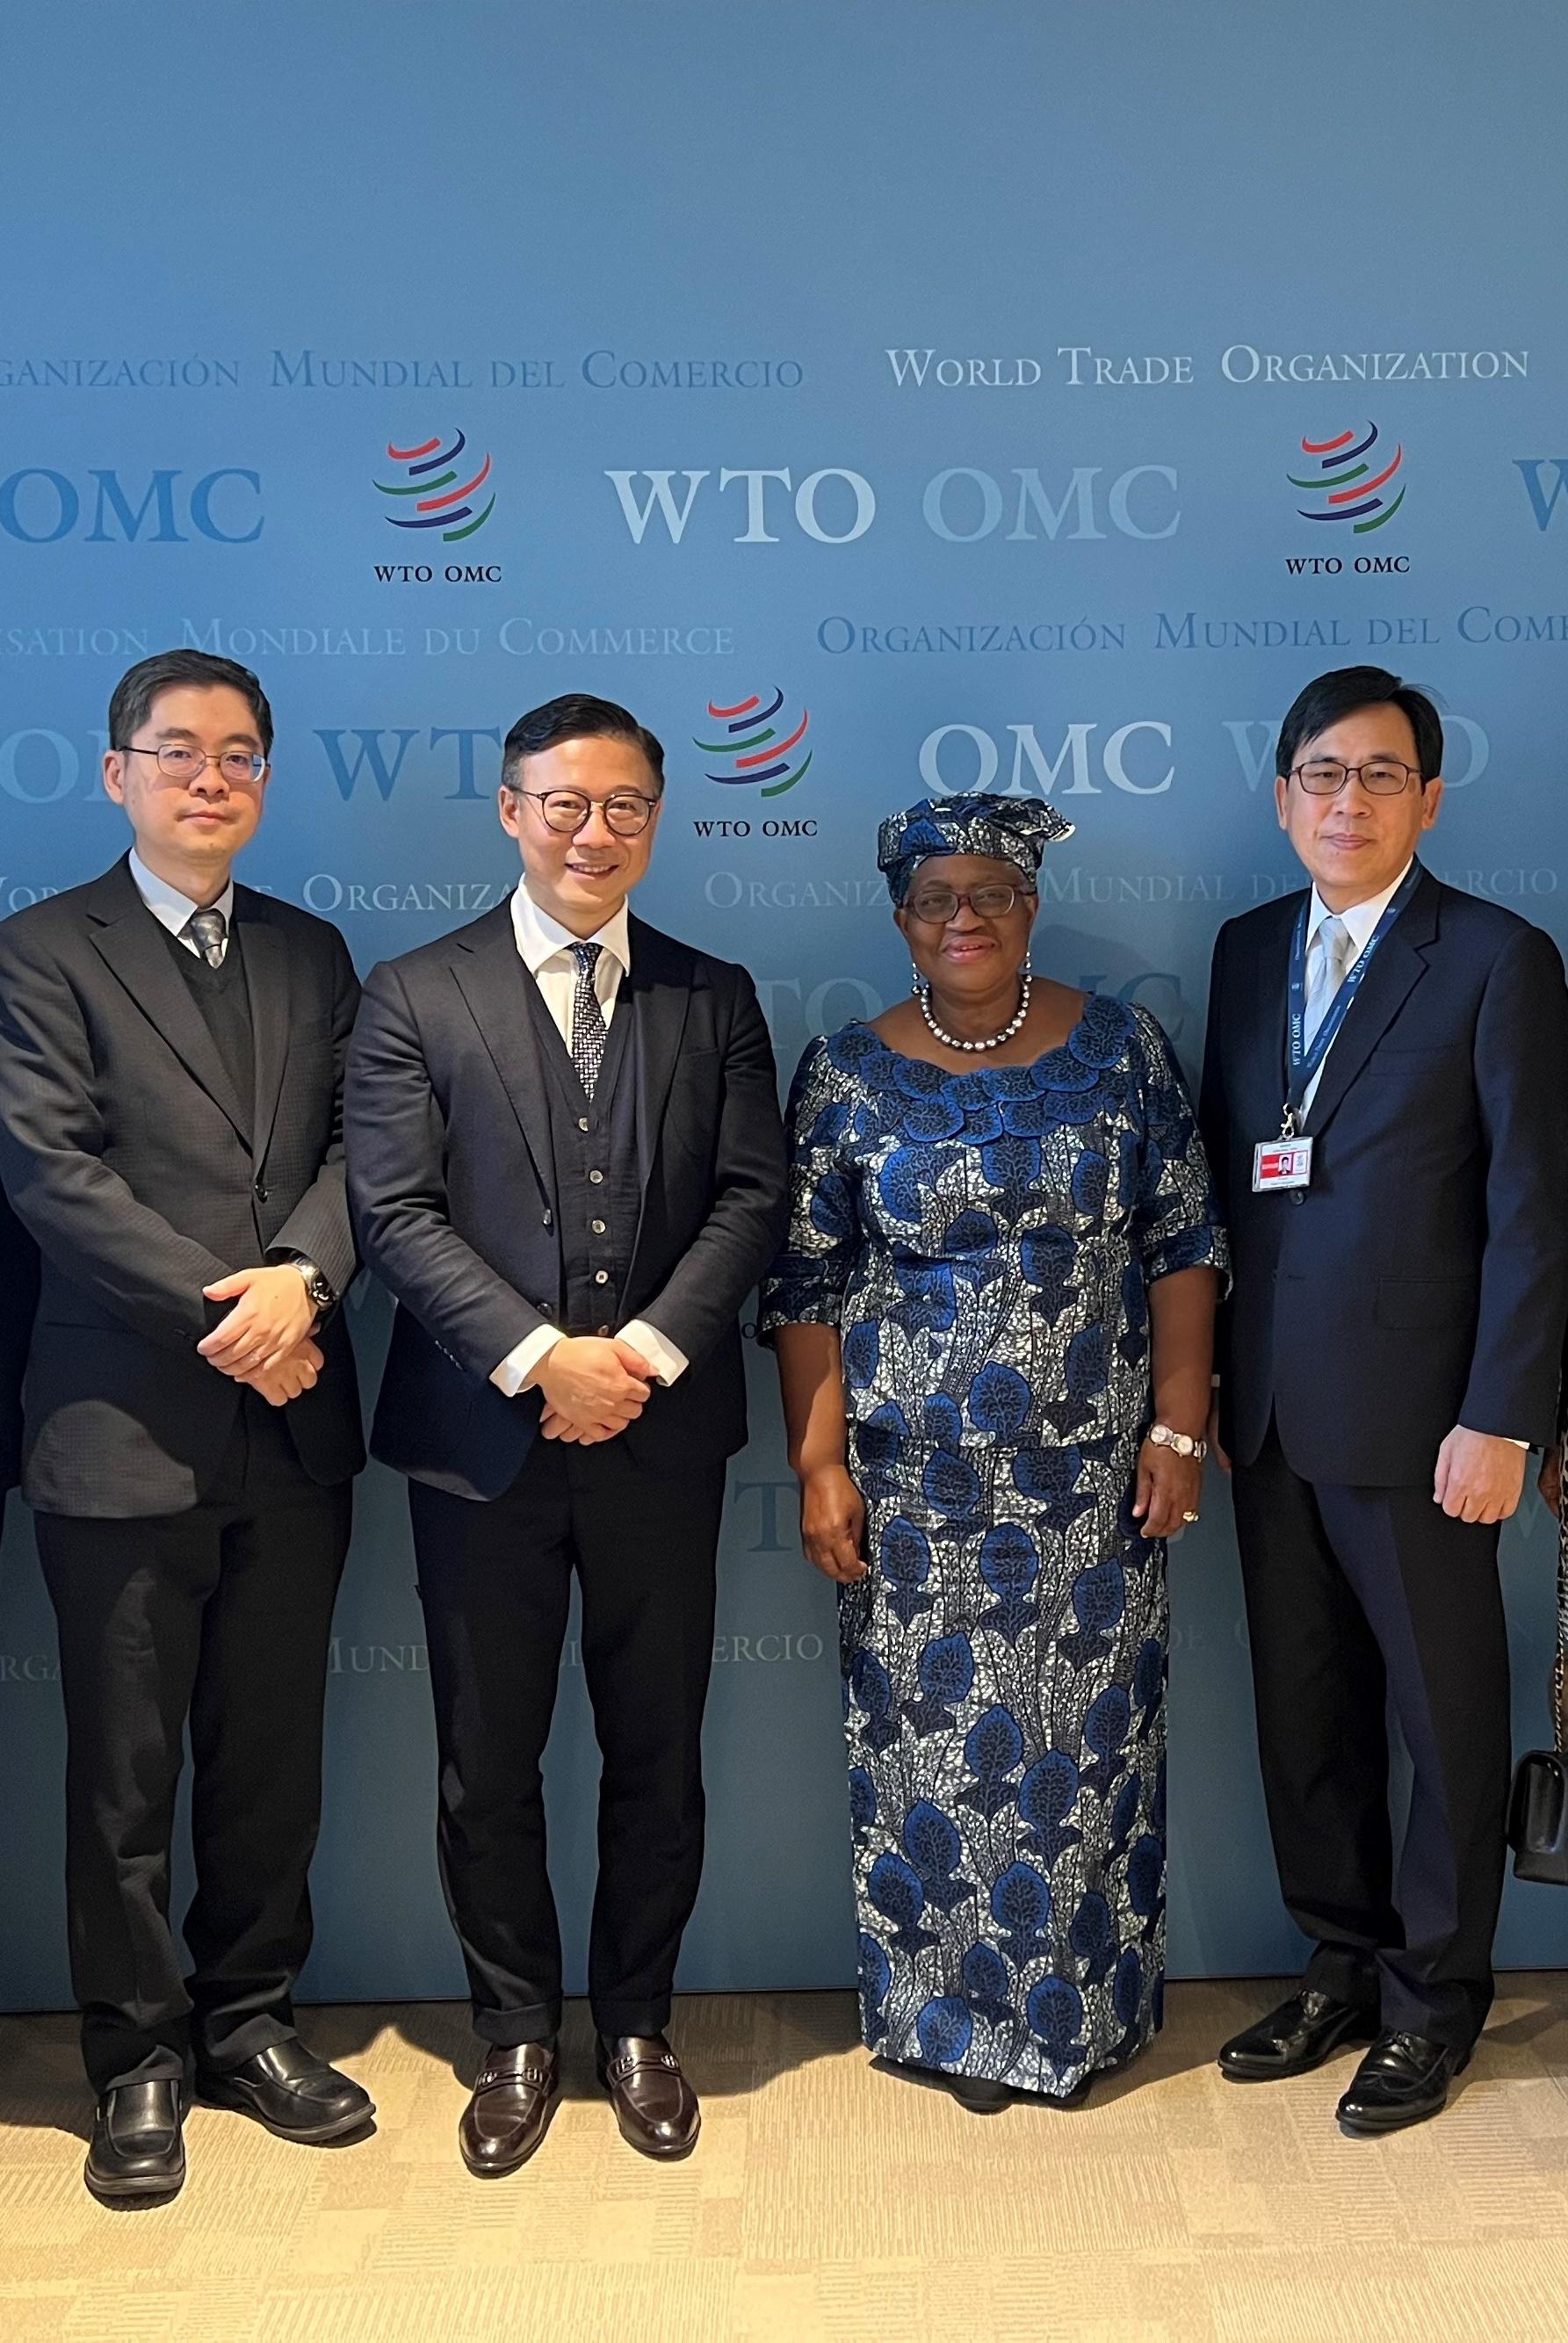 The Deputy Secretary for Justice, Mr Cheung Kwok-kwan (second left), accompanied by the Permanent Representative of the Hong Kong Special Administrative Region of China to the World Trade Organization (WTO), Mr Laurie Lo (first right), and the Law Officer (International Law) of the Department of Justice, Dr James Ding (first left), met with the Director-General of the WTO, Dr Ngozi Okonjo-Iweala (second right), in Geneva, Switzerland, on March 9 (Geneva time).